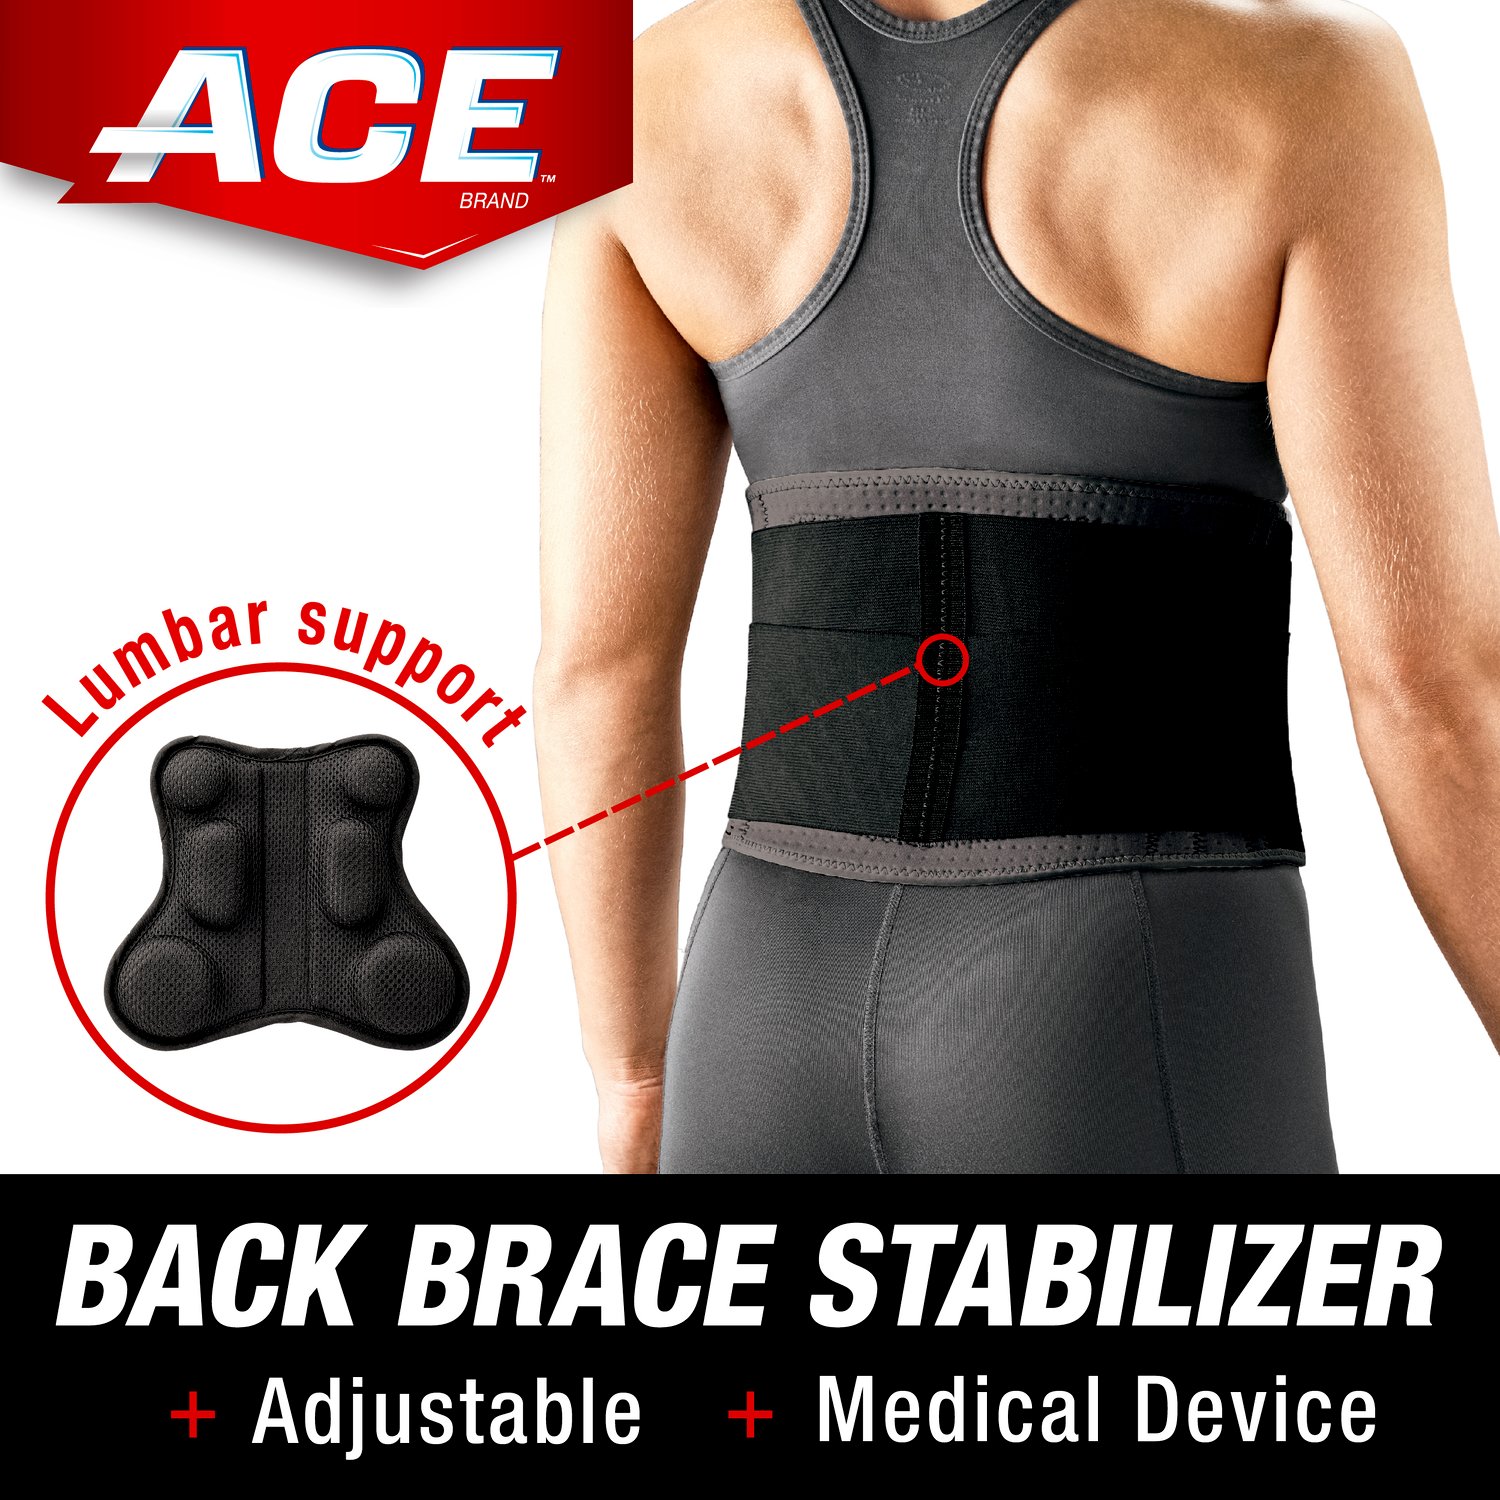 7100280906 - ACE Brand Deluxe Back Stabilizer with Lumbar Support 207399, Adjustable